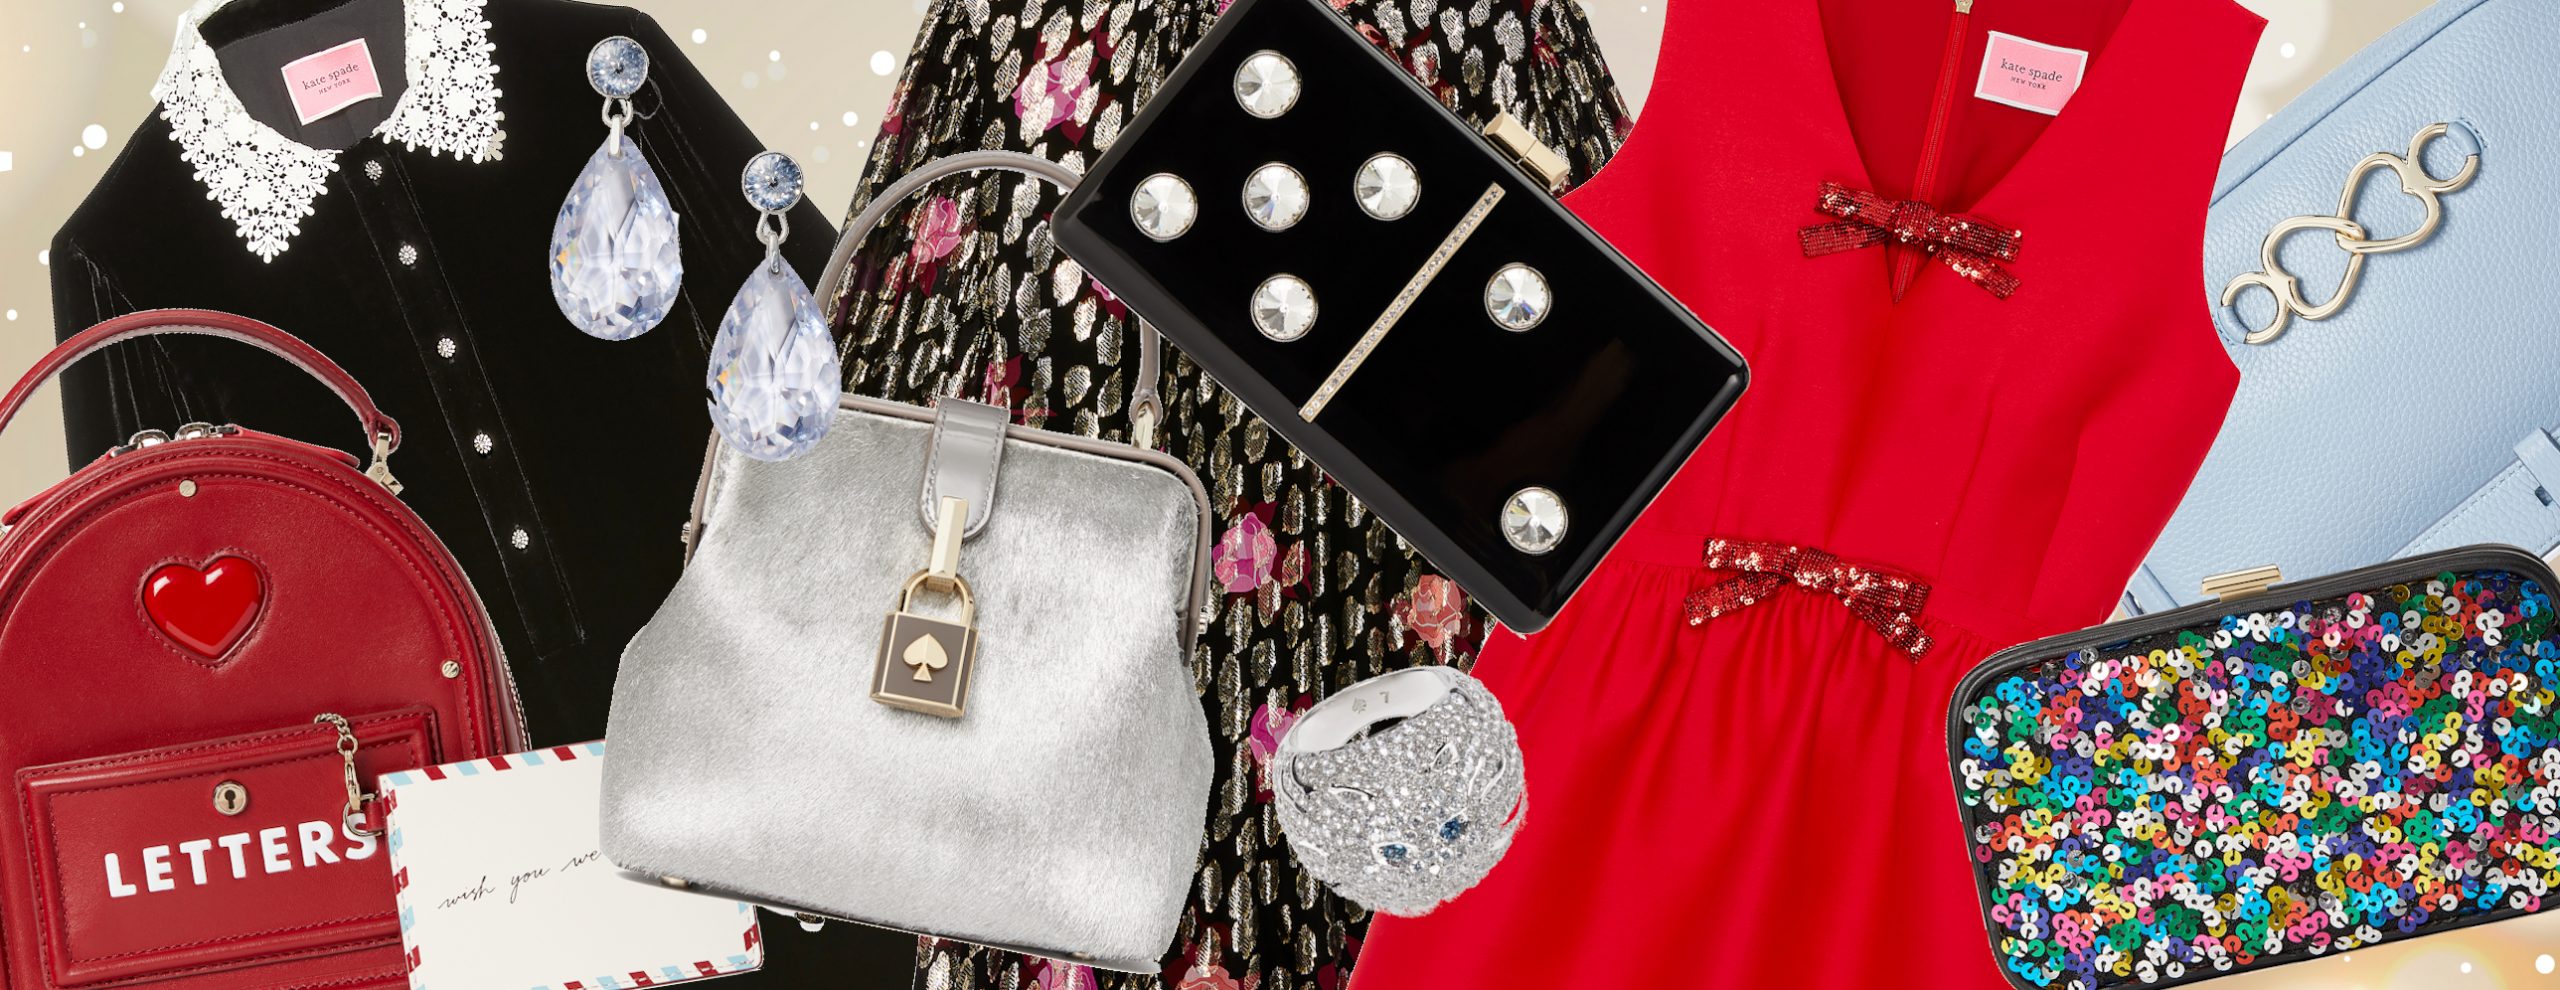 Kate Spade New York Holiday 2020: Whimsical Bags, Glitter Clutches